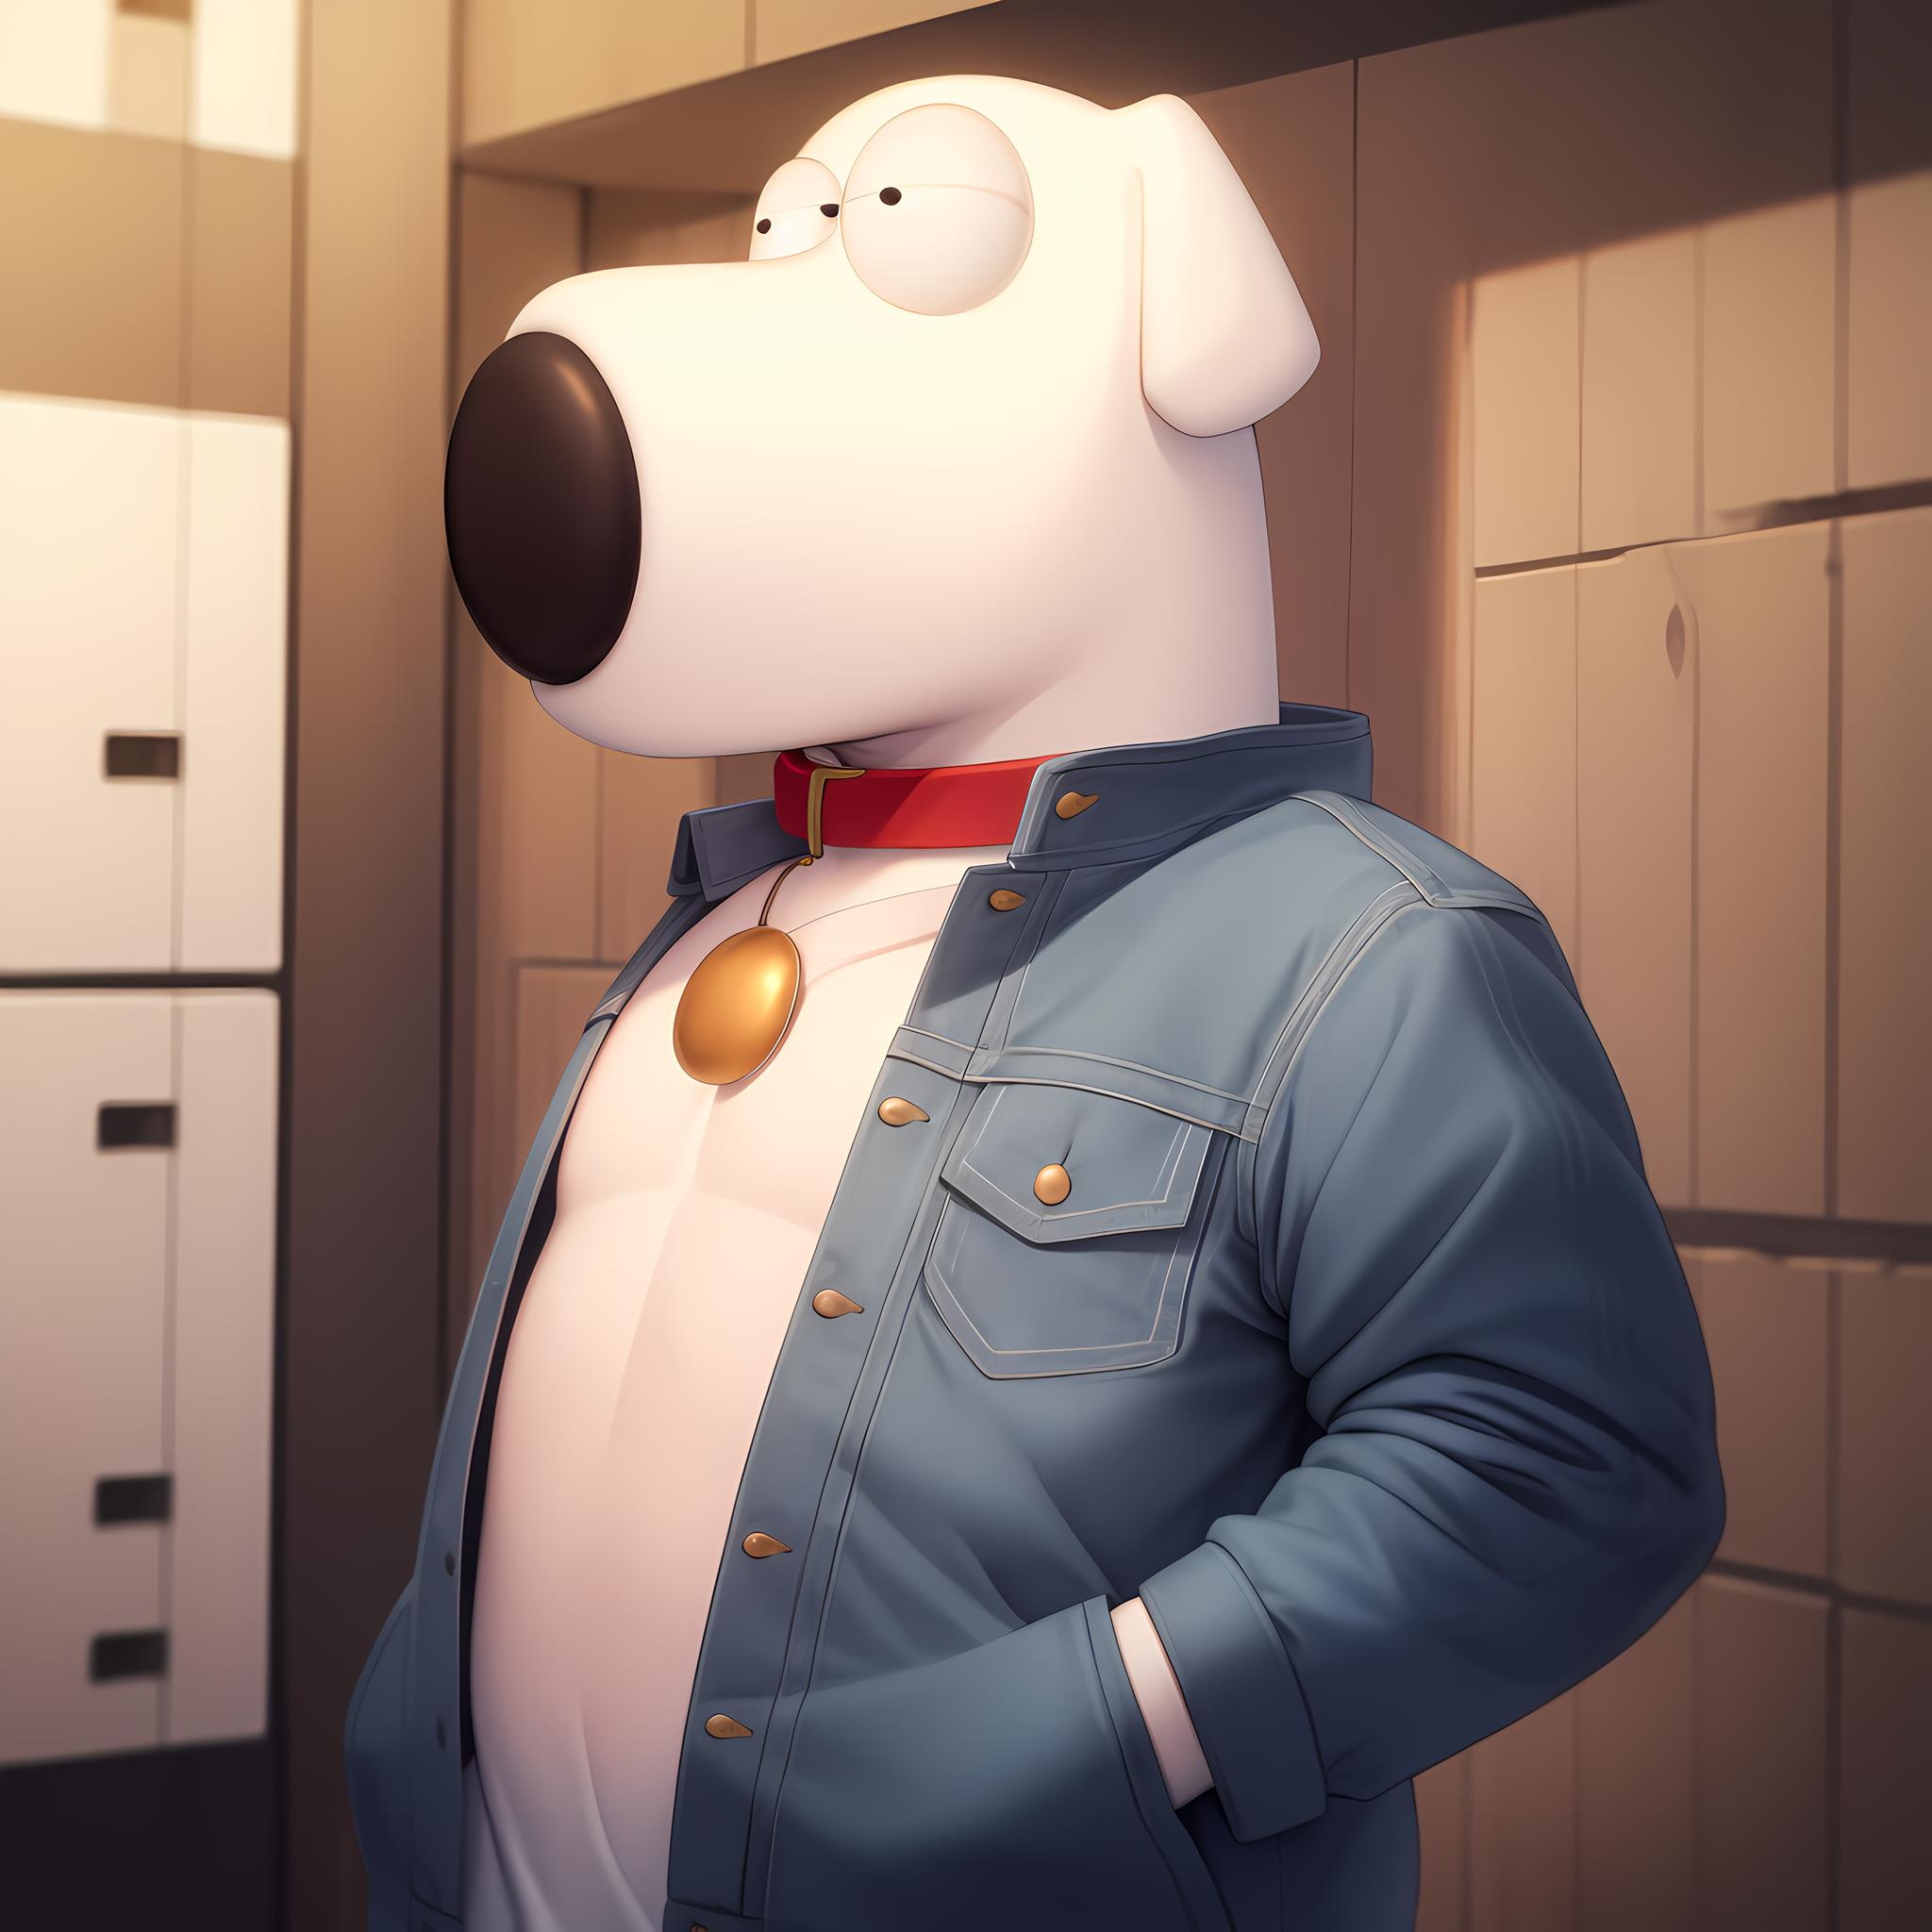 Brian Griffin image by TheGooder